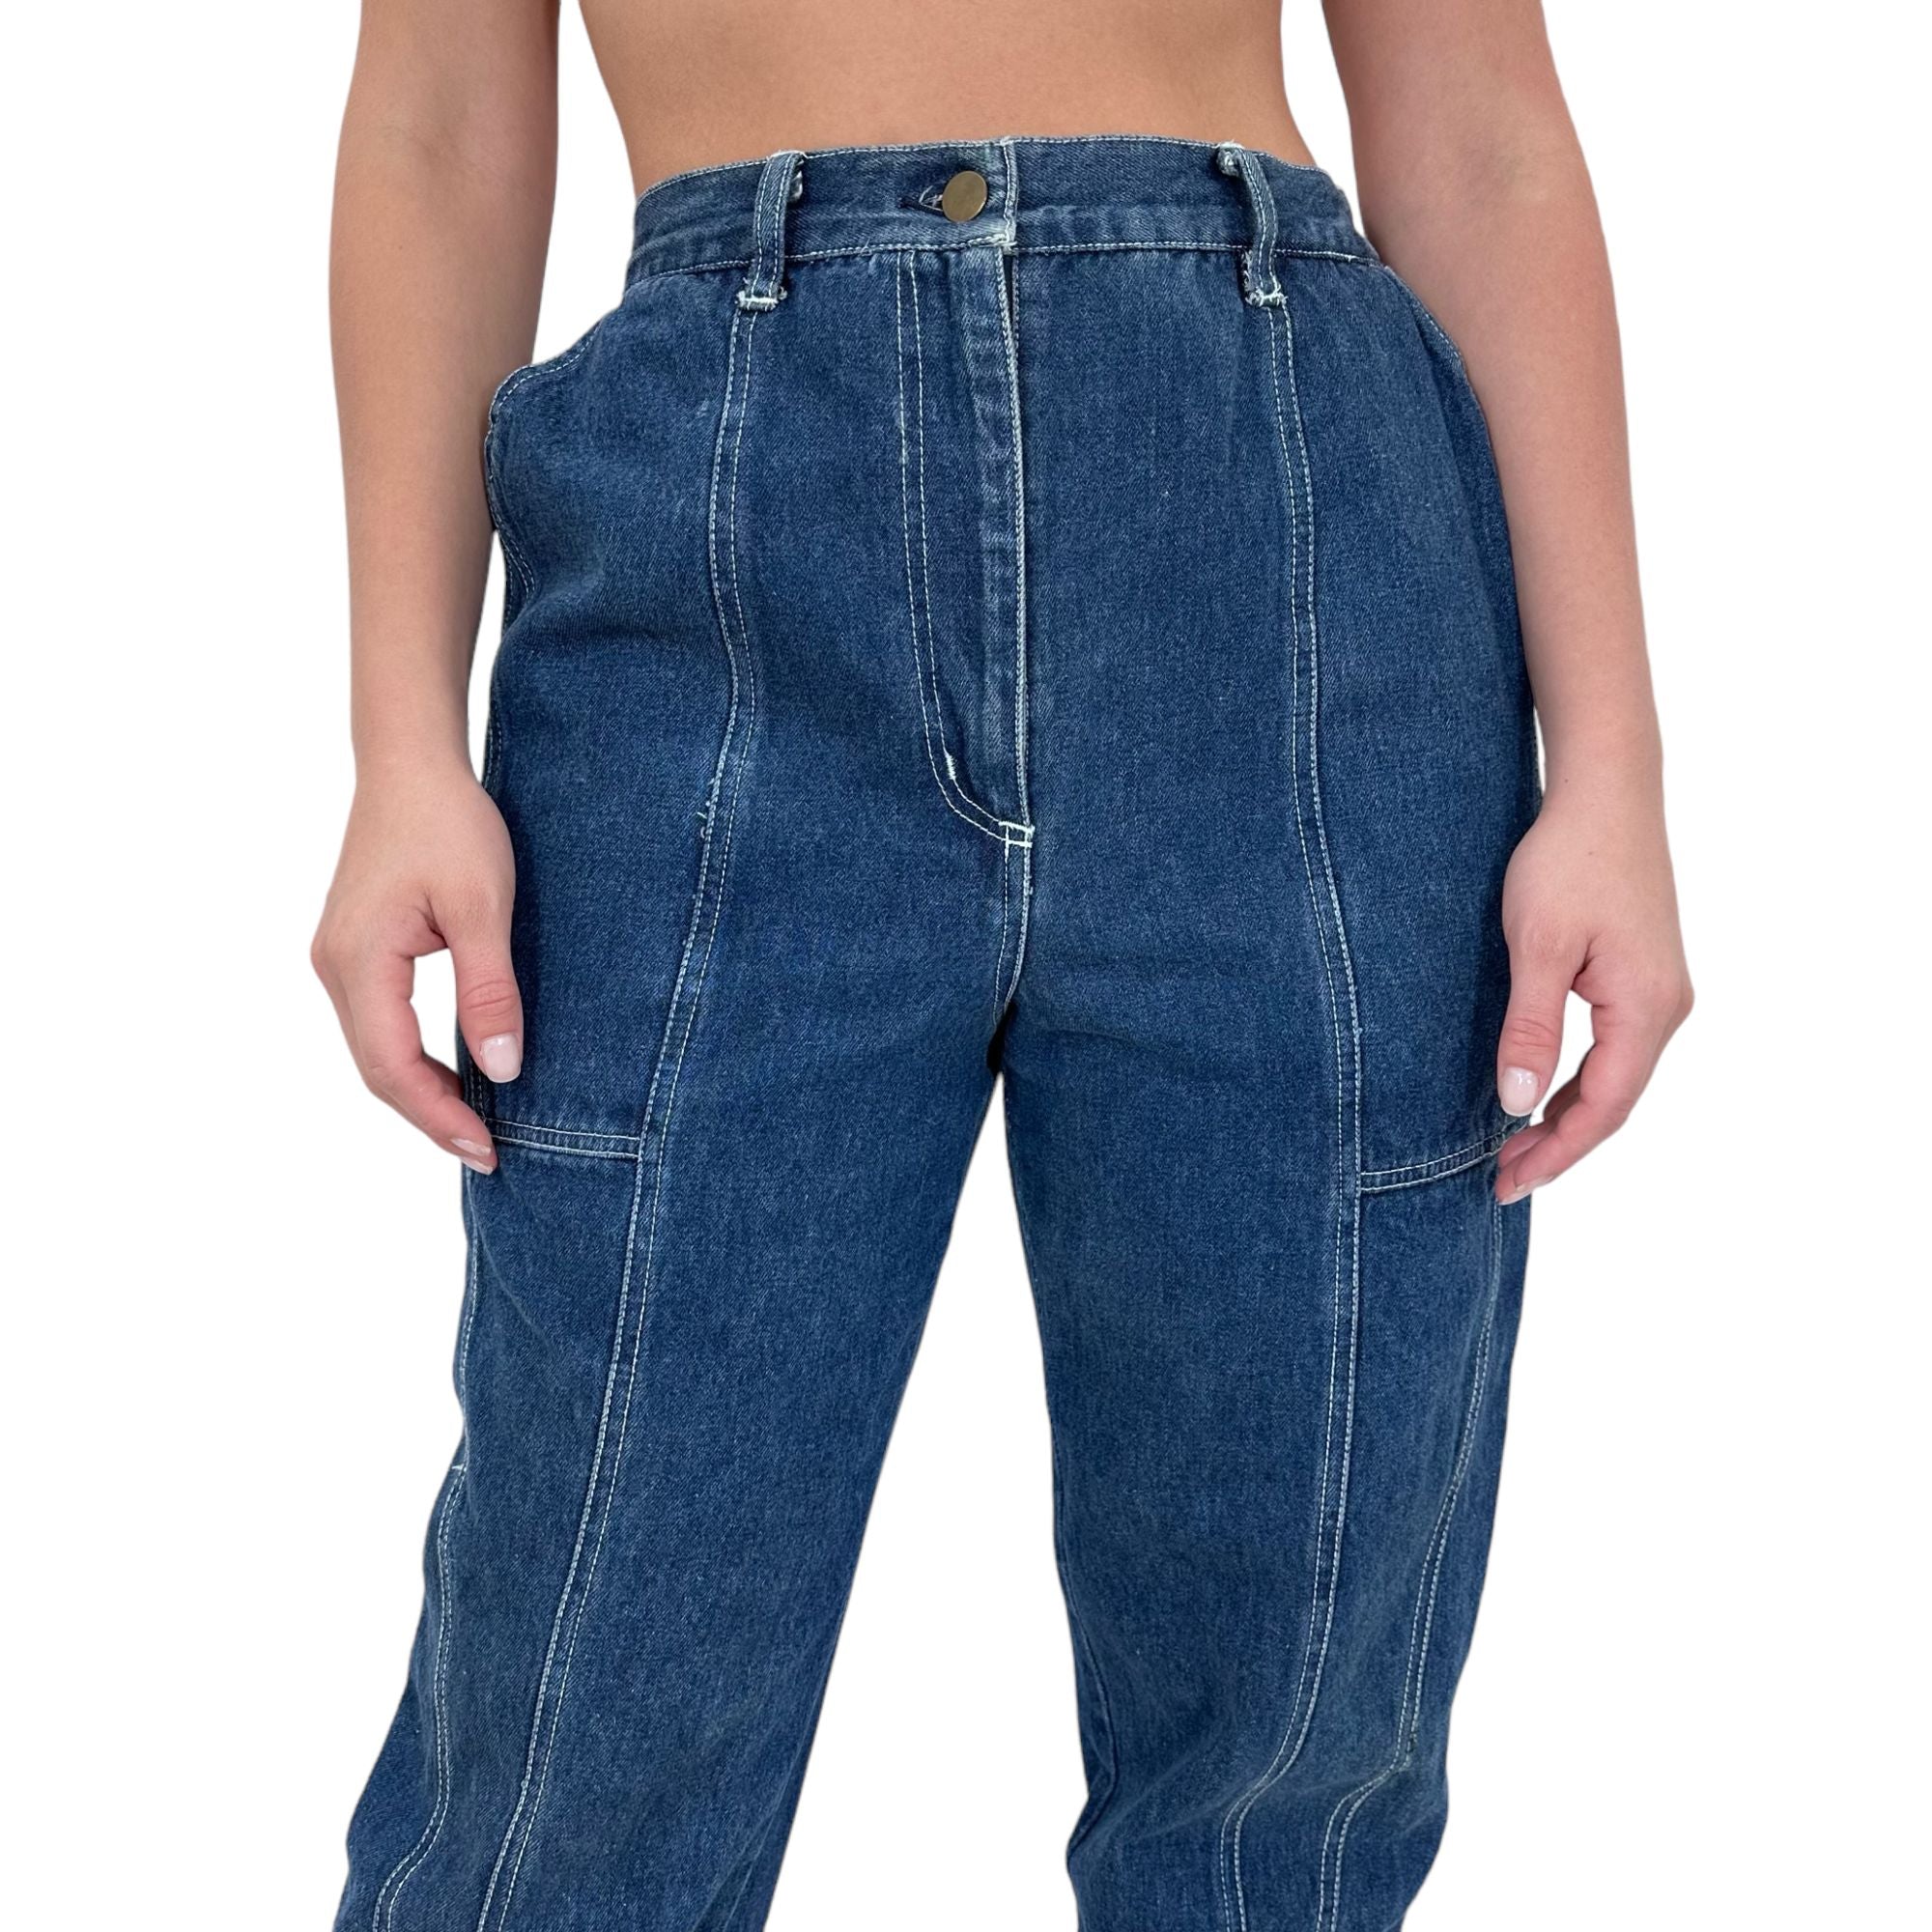 90s Vintage Blue and White Stitch High Waist Jeans [L]